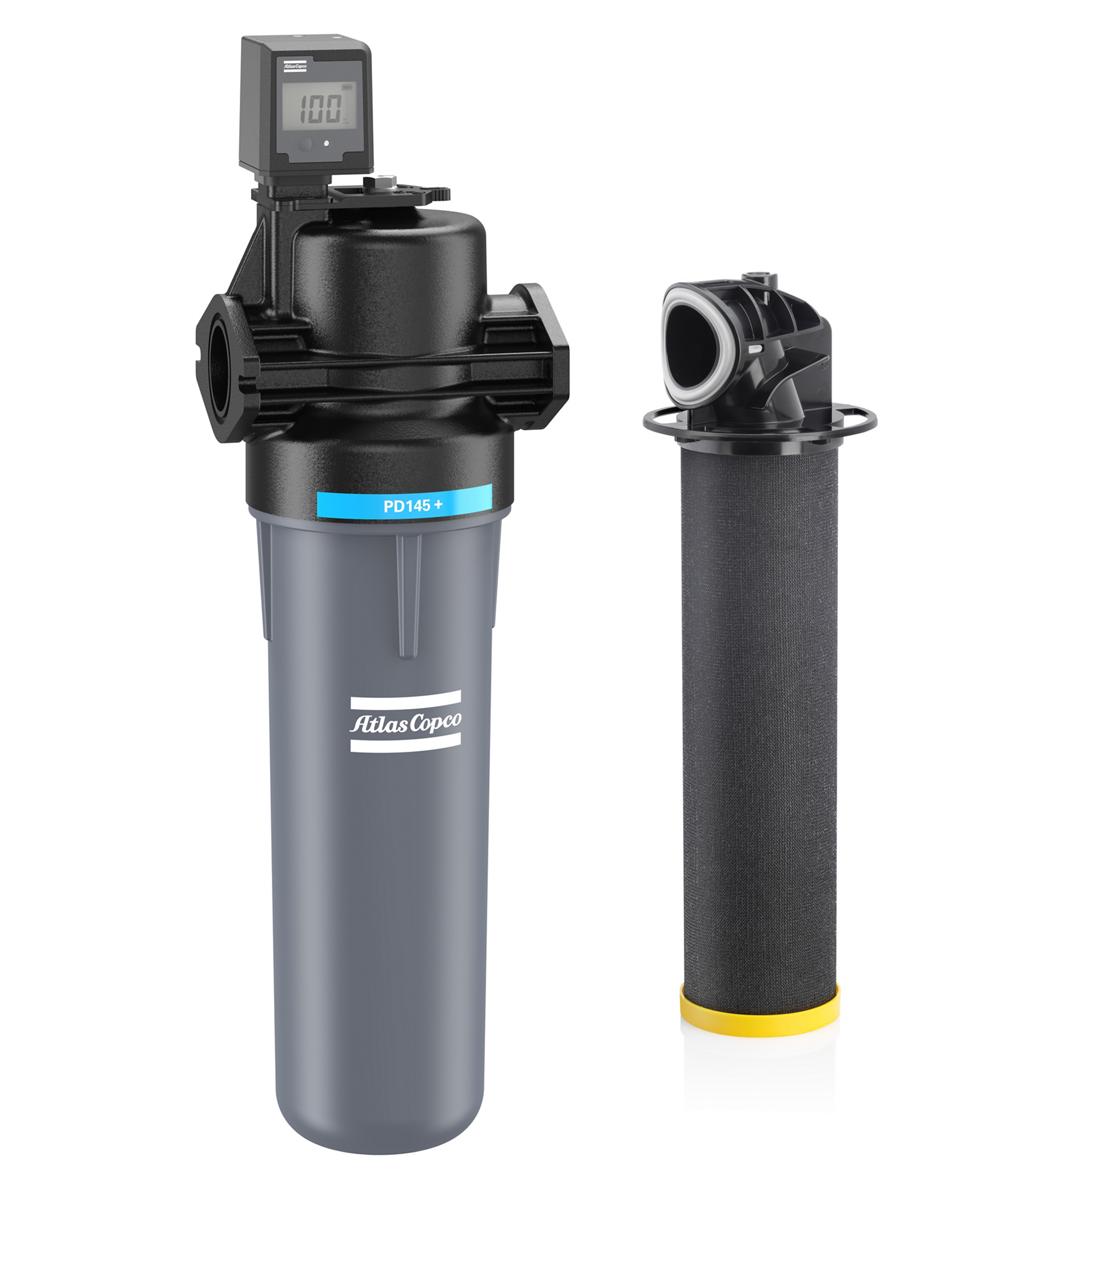 PD145 + Next generation compressed air filters